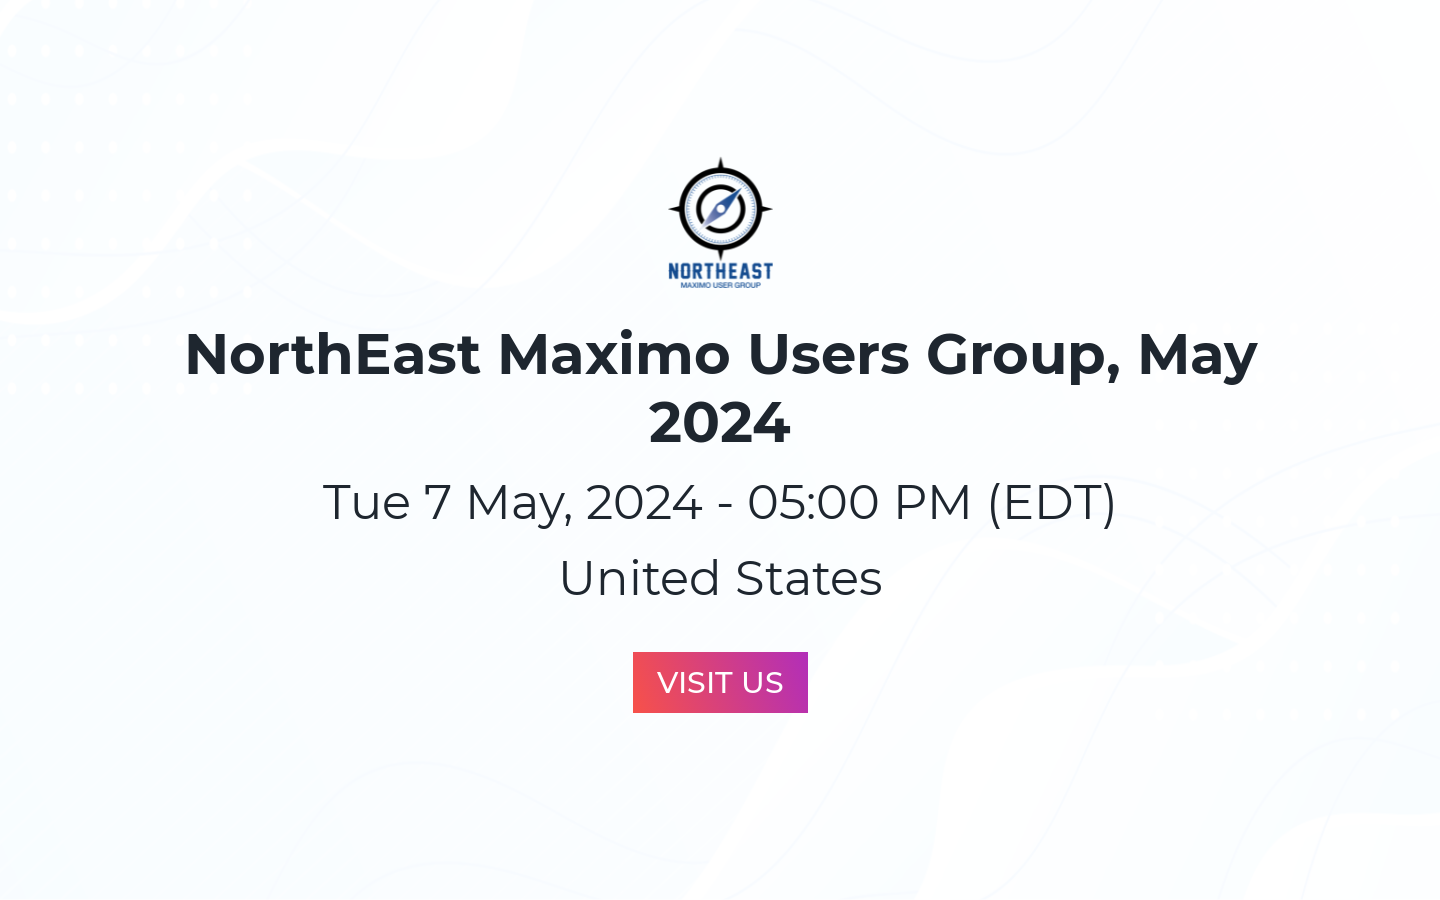 NorthEast Maximo Users Group, May 2024